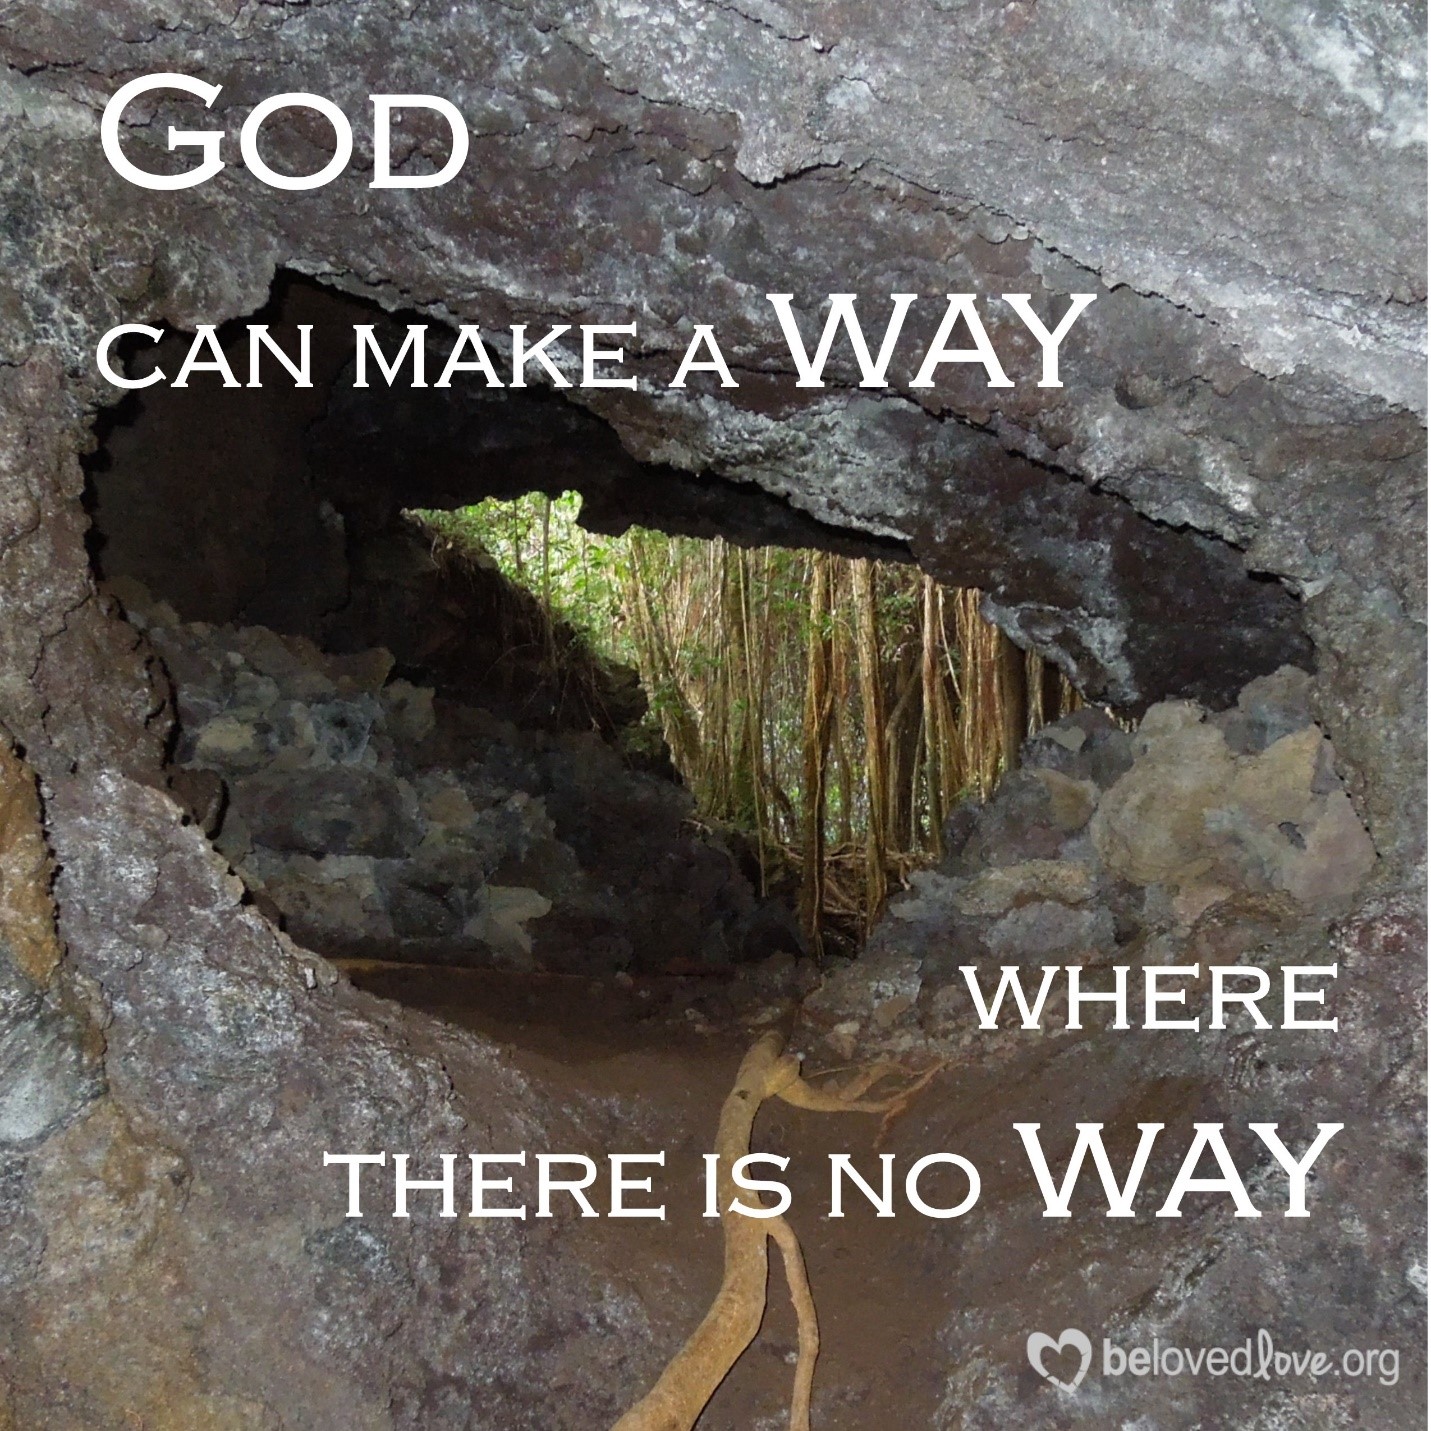 God can make a way when there is no way